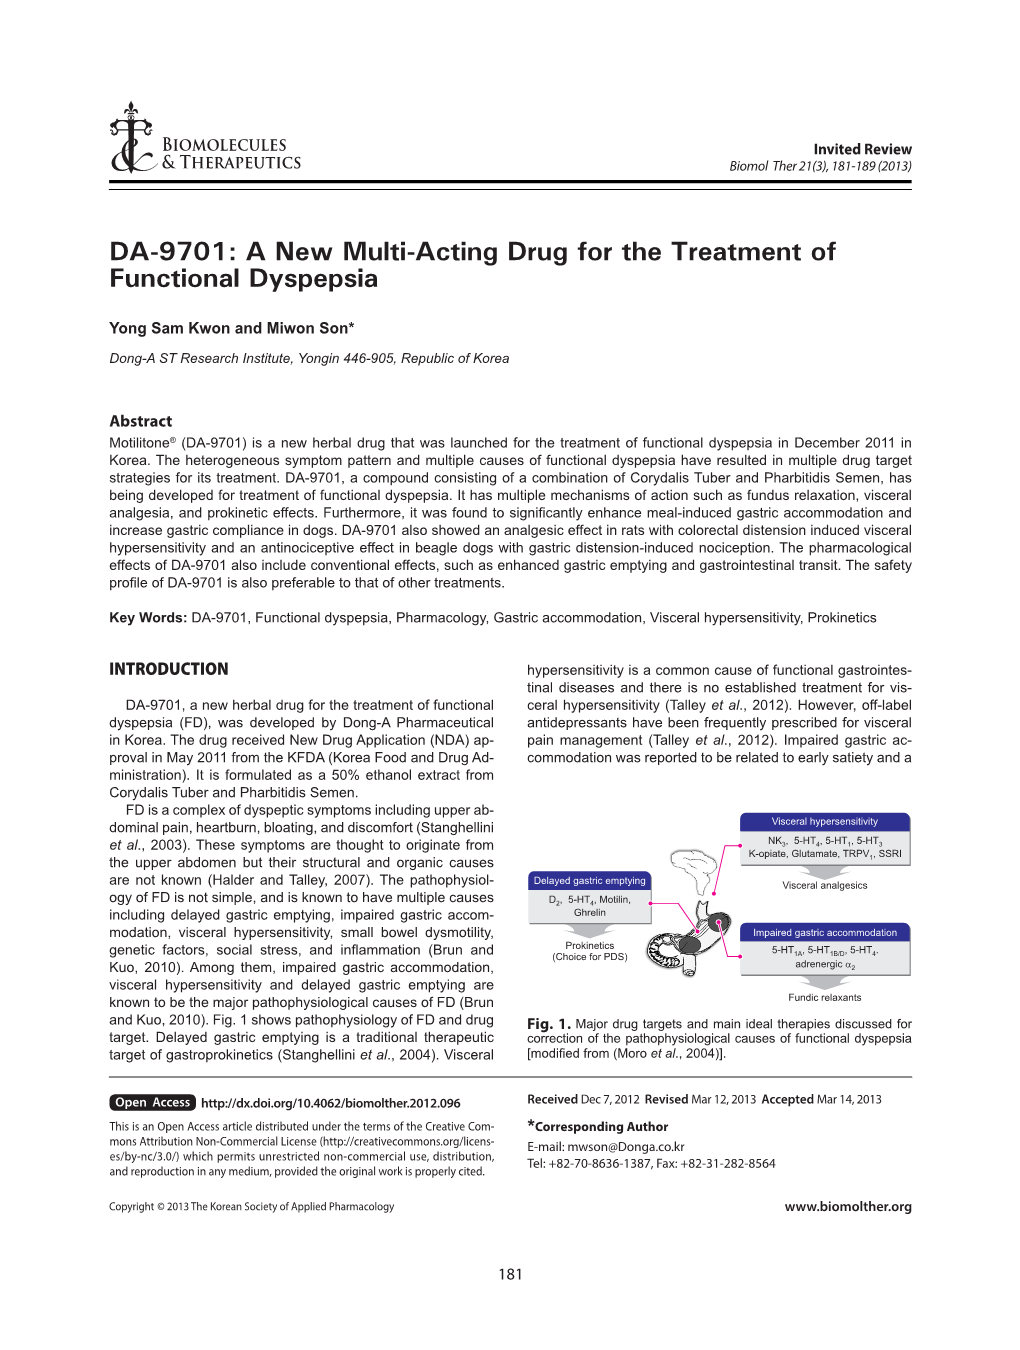 A New Multi-Acting Drug for the Treatment of Functional Dyspepsia